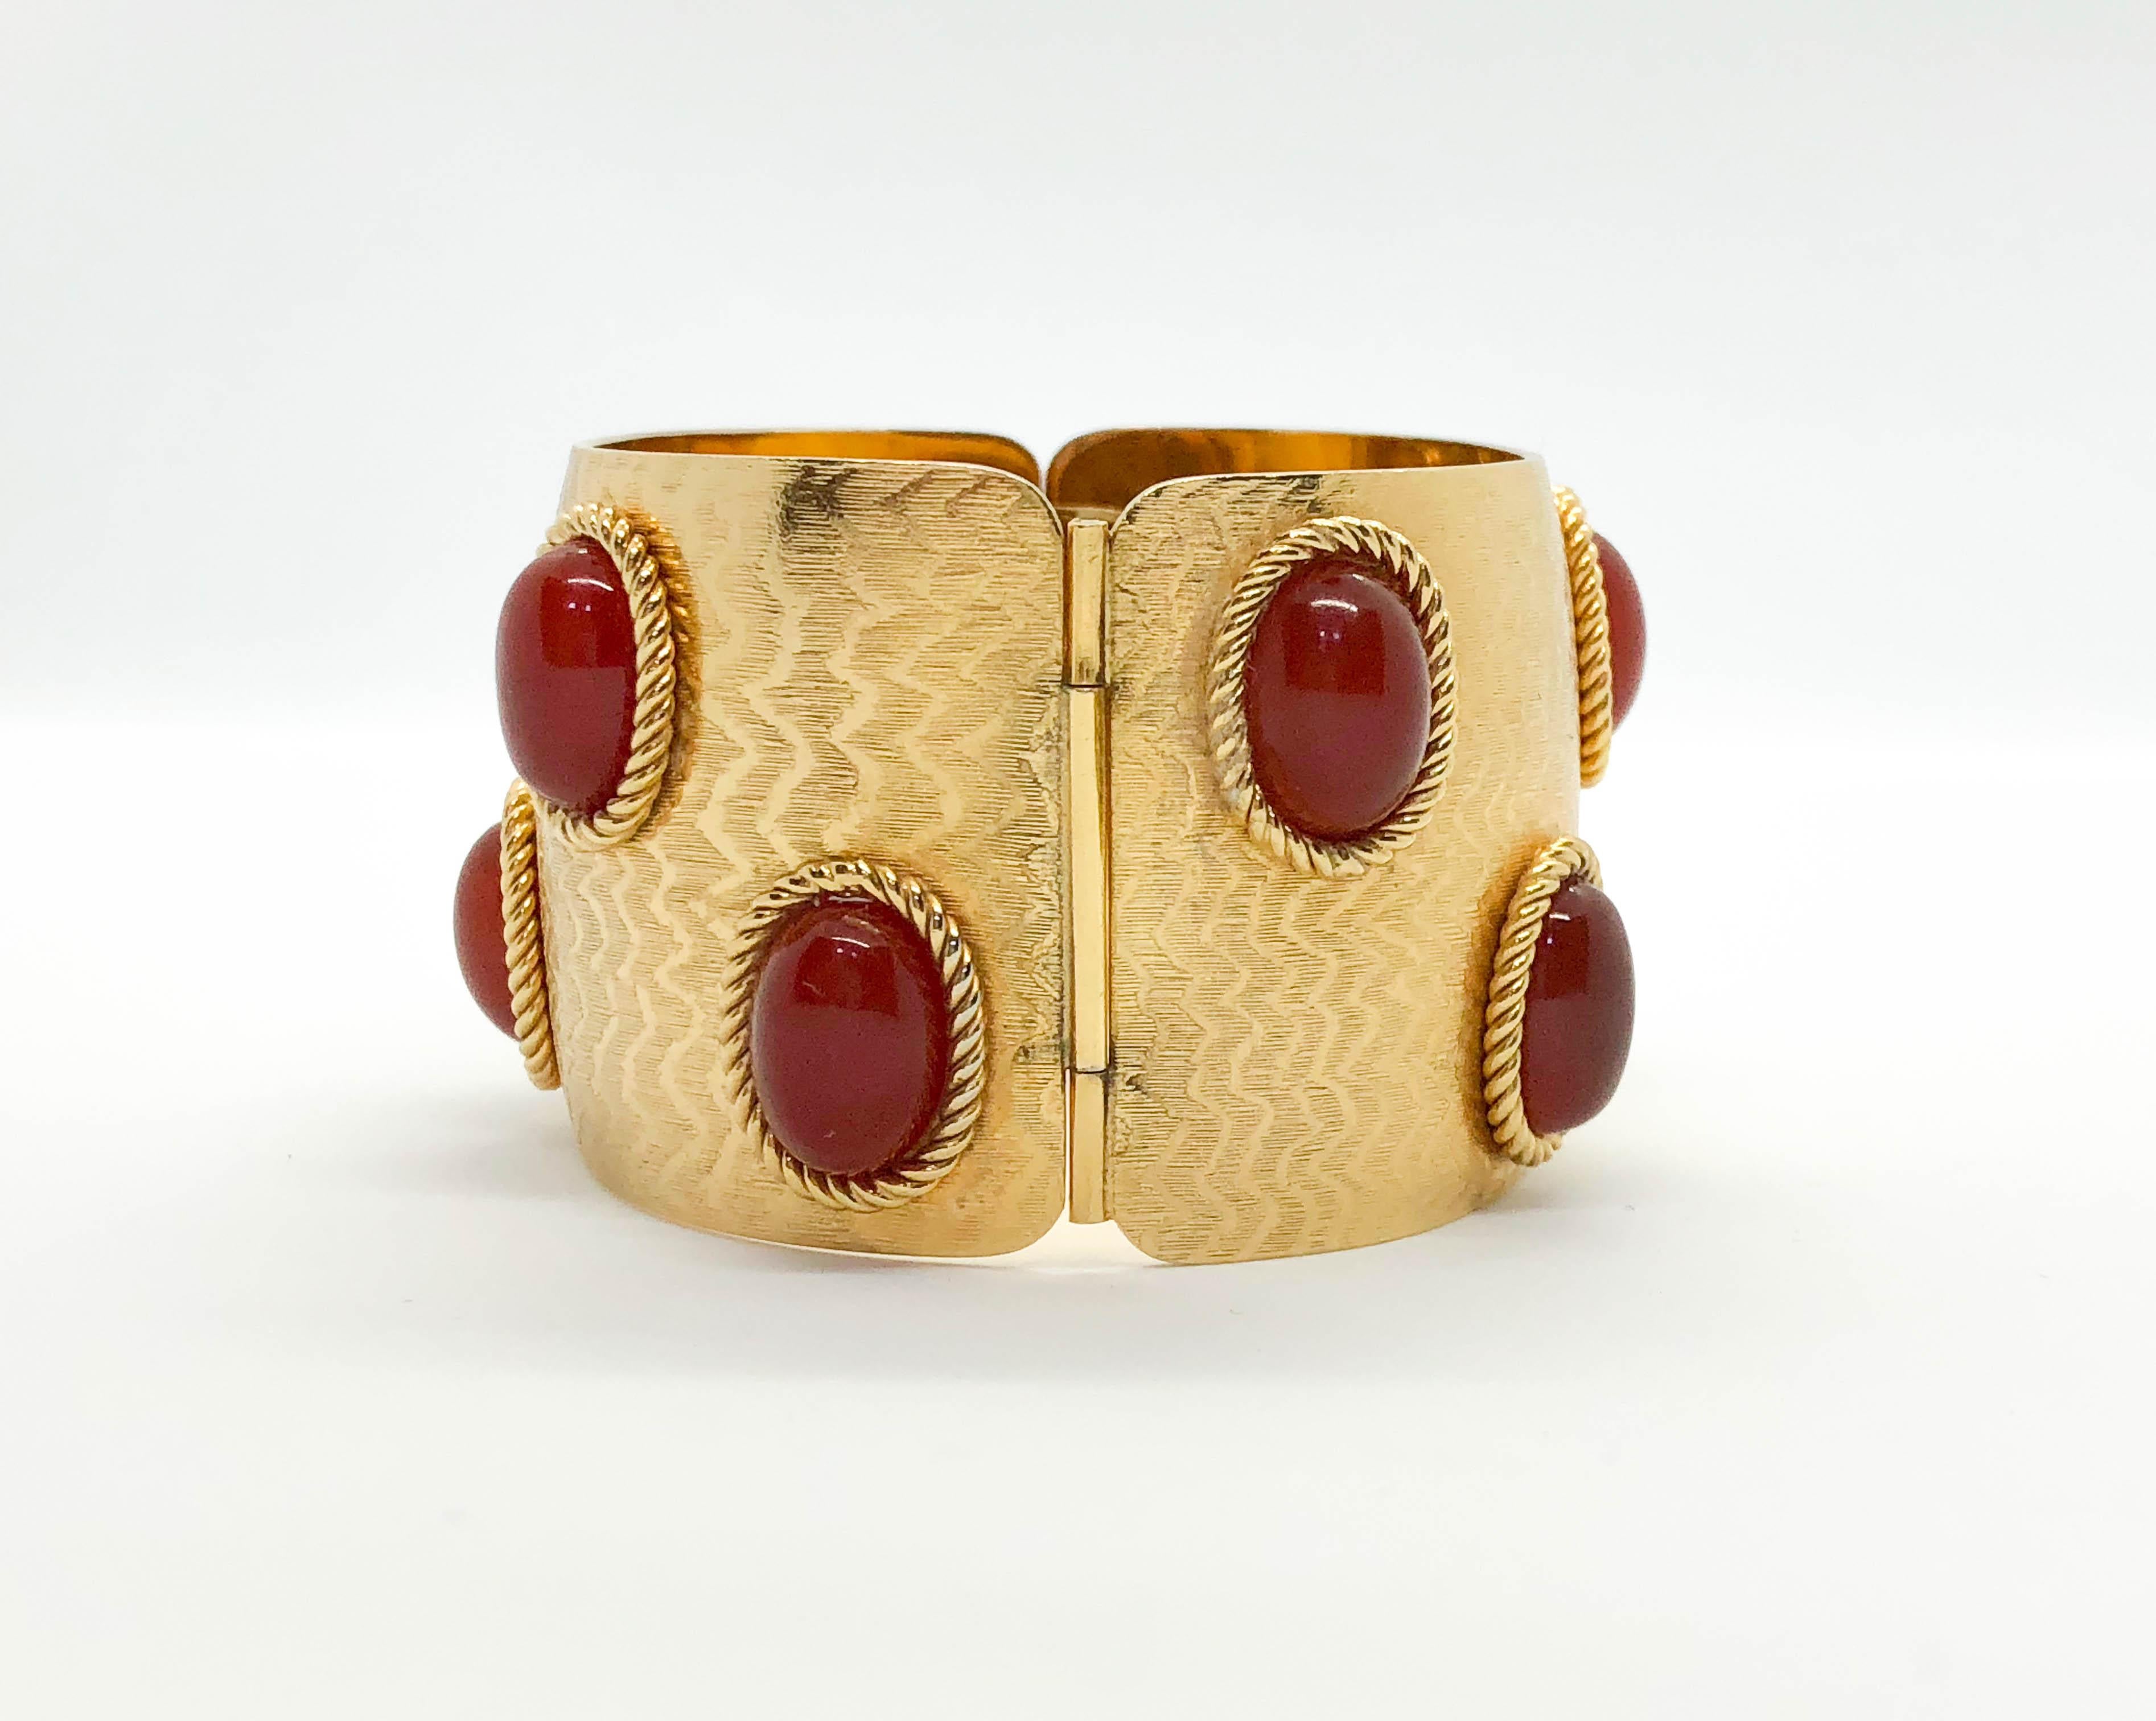 1968 Dior Gold-Plated Cuff Bracelet Embellished with Faux Amber Beads For Sale 6